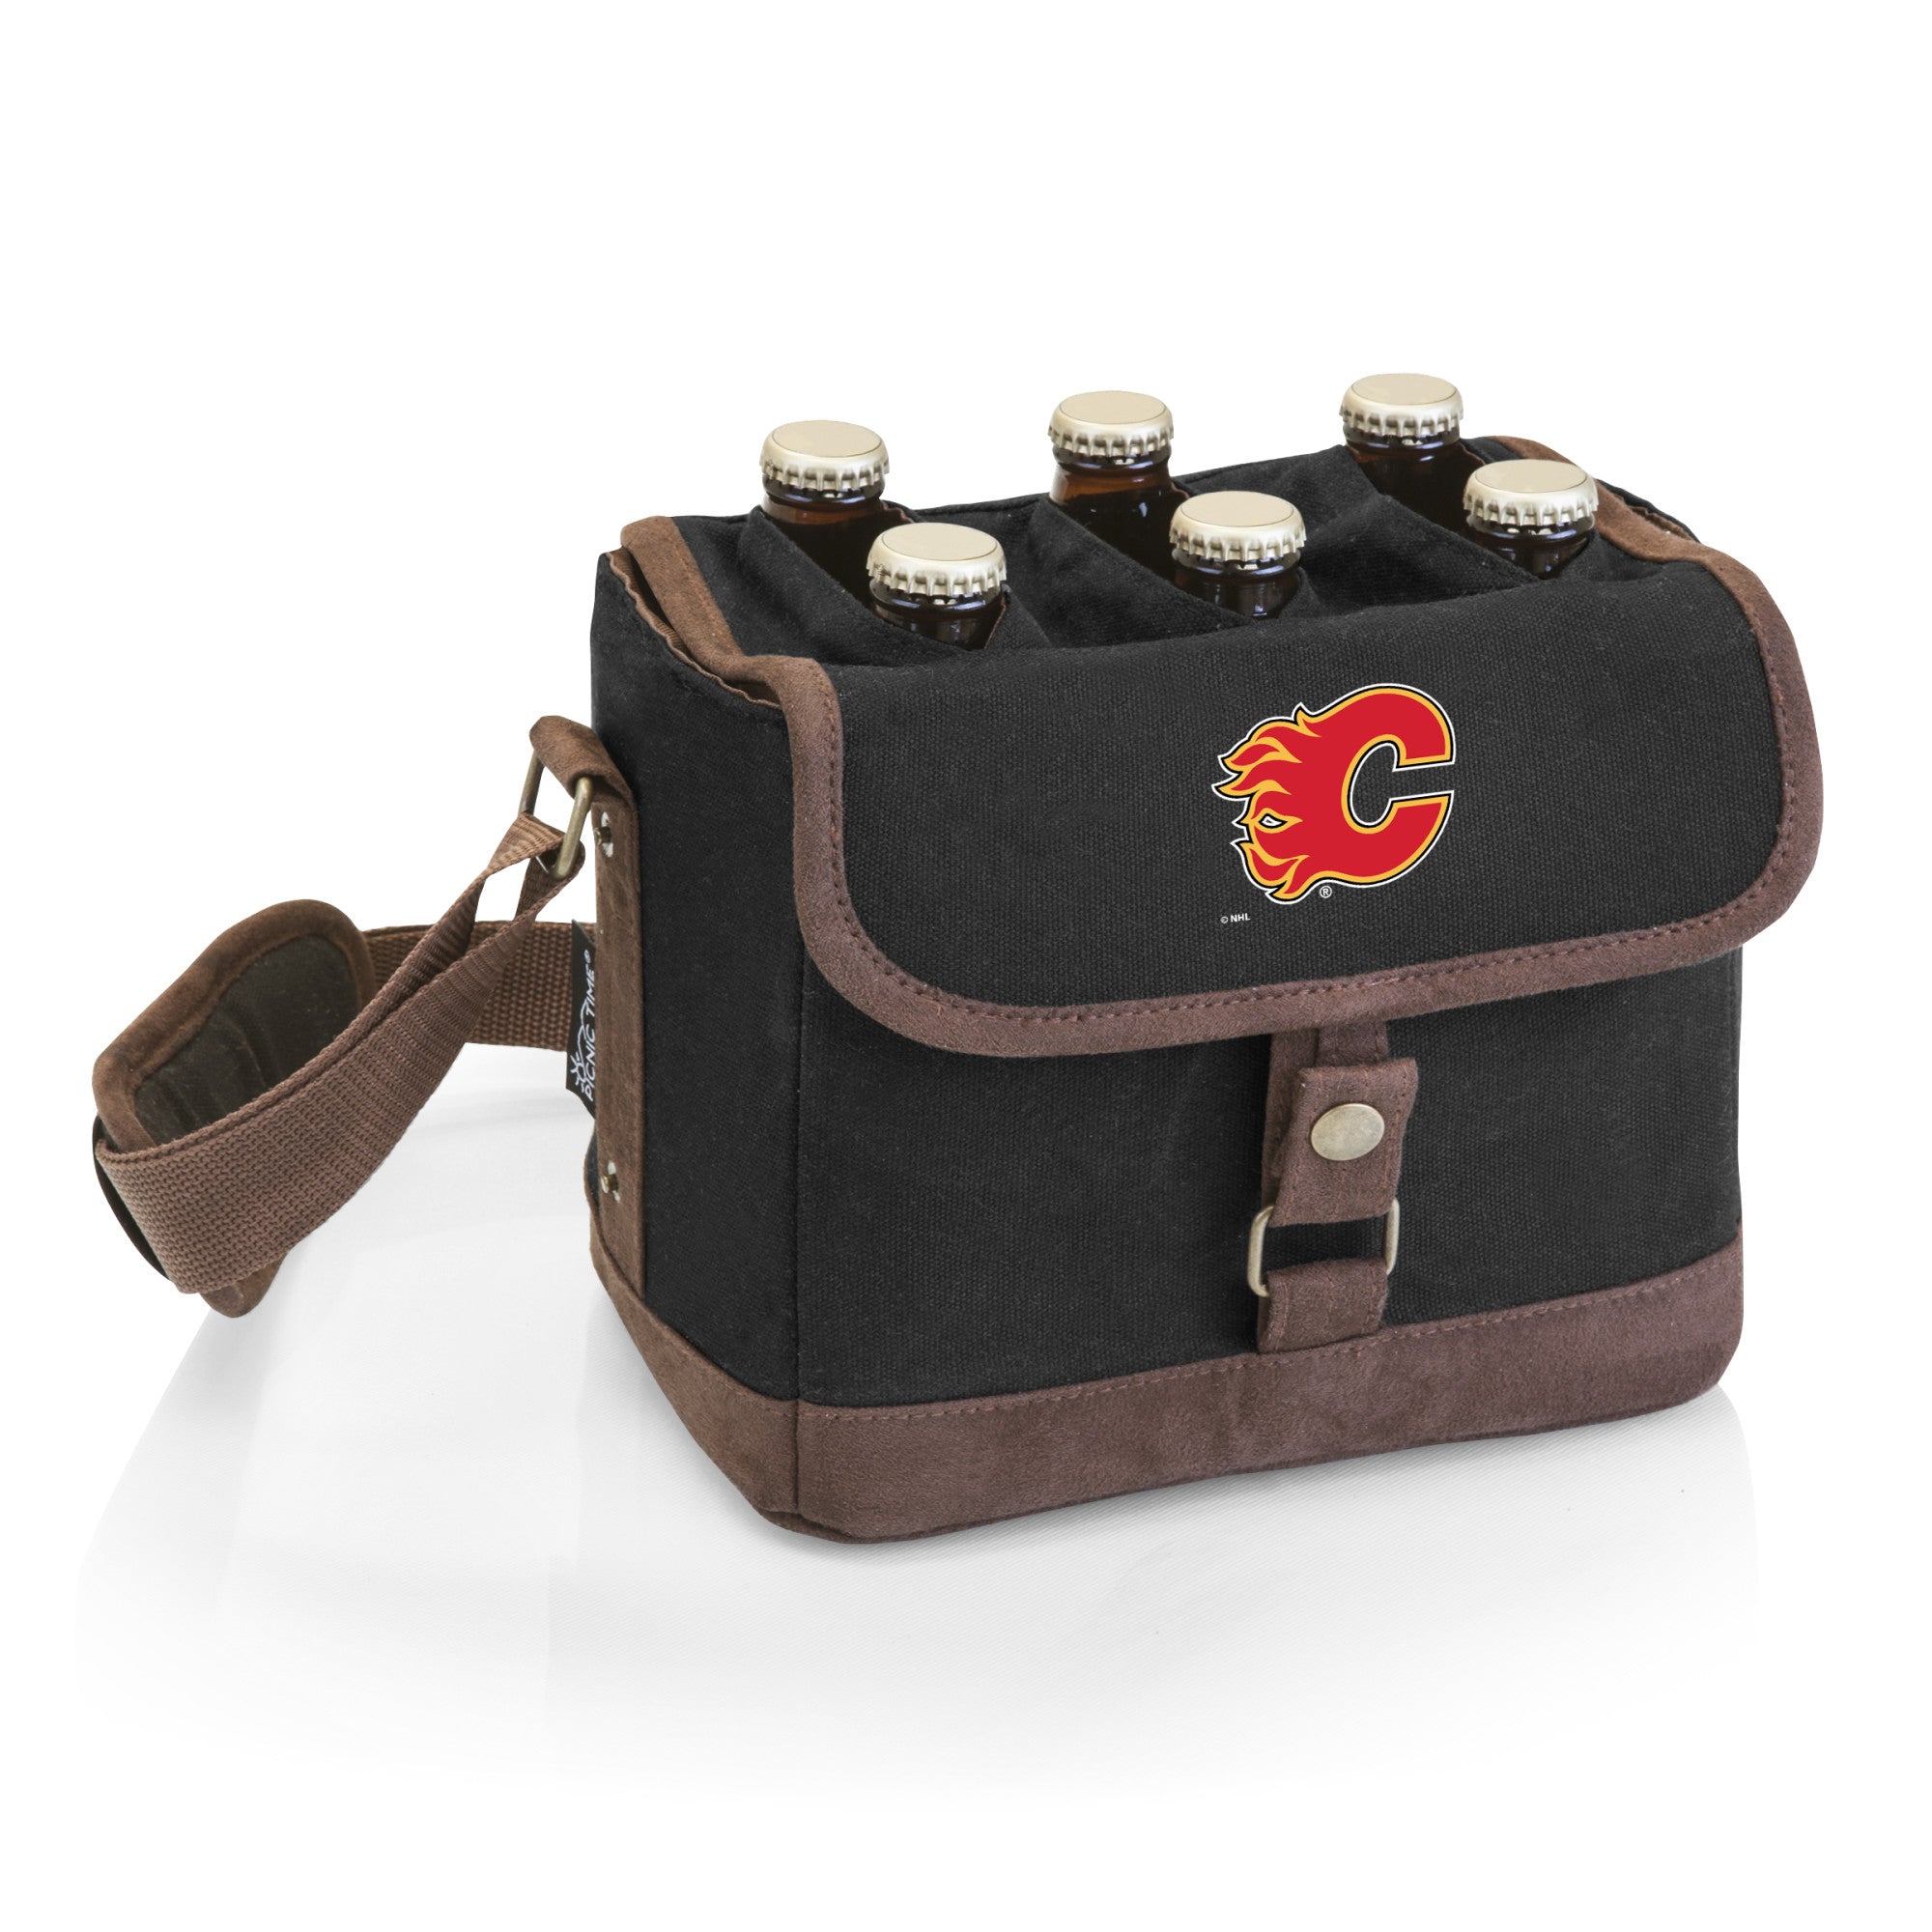 Calgary Flames - Beer Caddy Cooler Tote with Opener